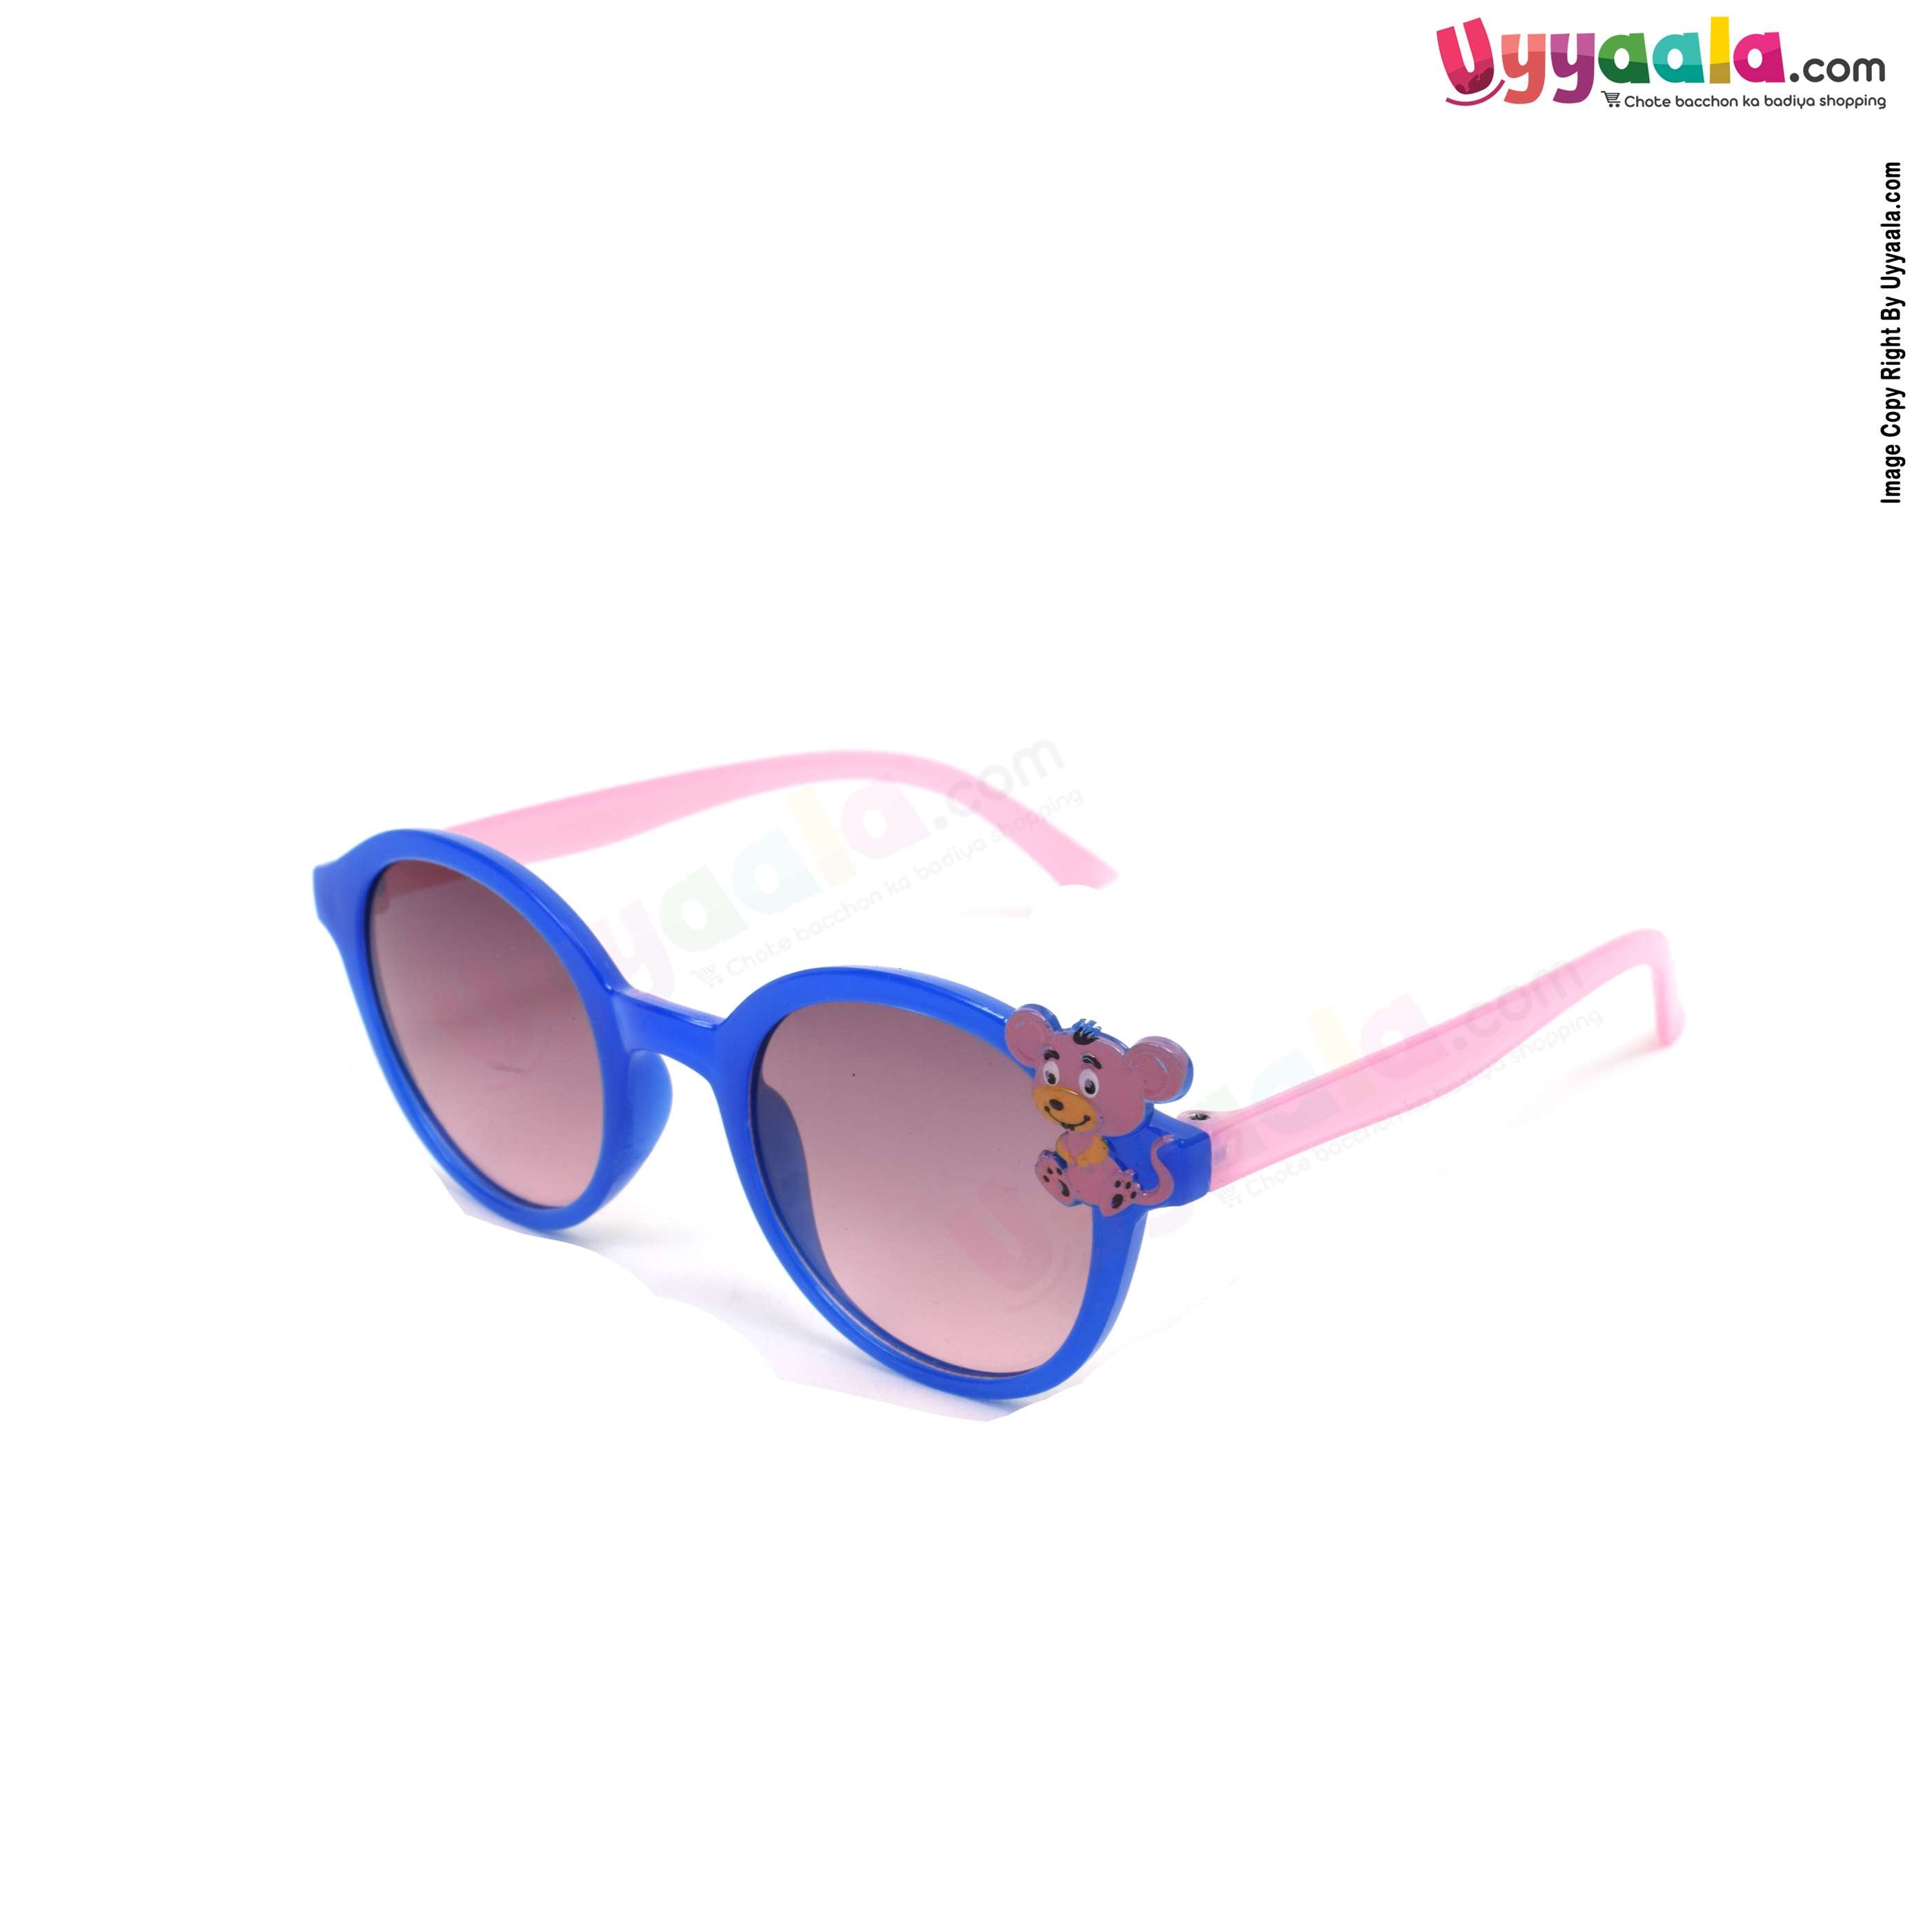 Discover more than 181 transparent sunglasses online india latest